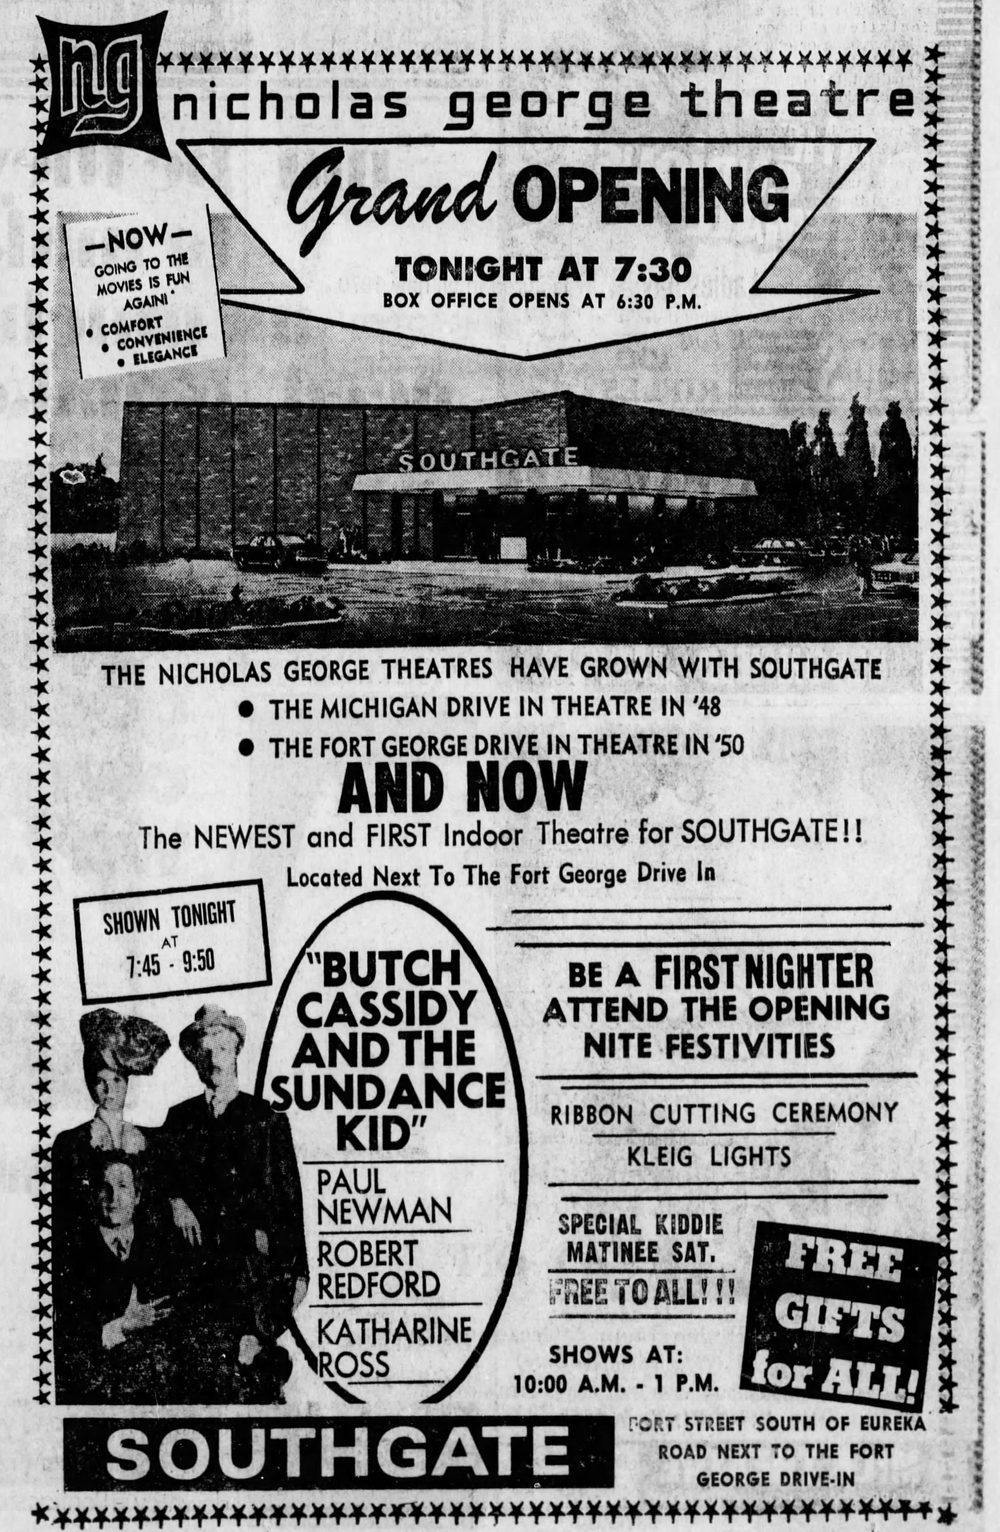 Southgate 4 - GRAND OPENING AD OCTOBER 1969